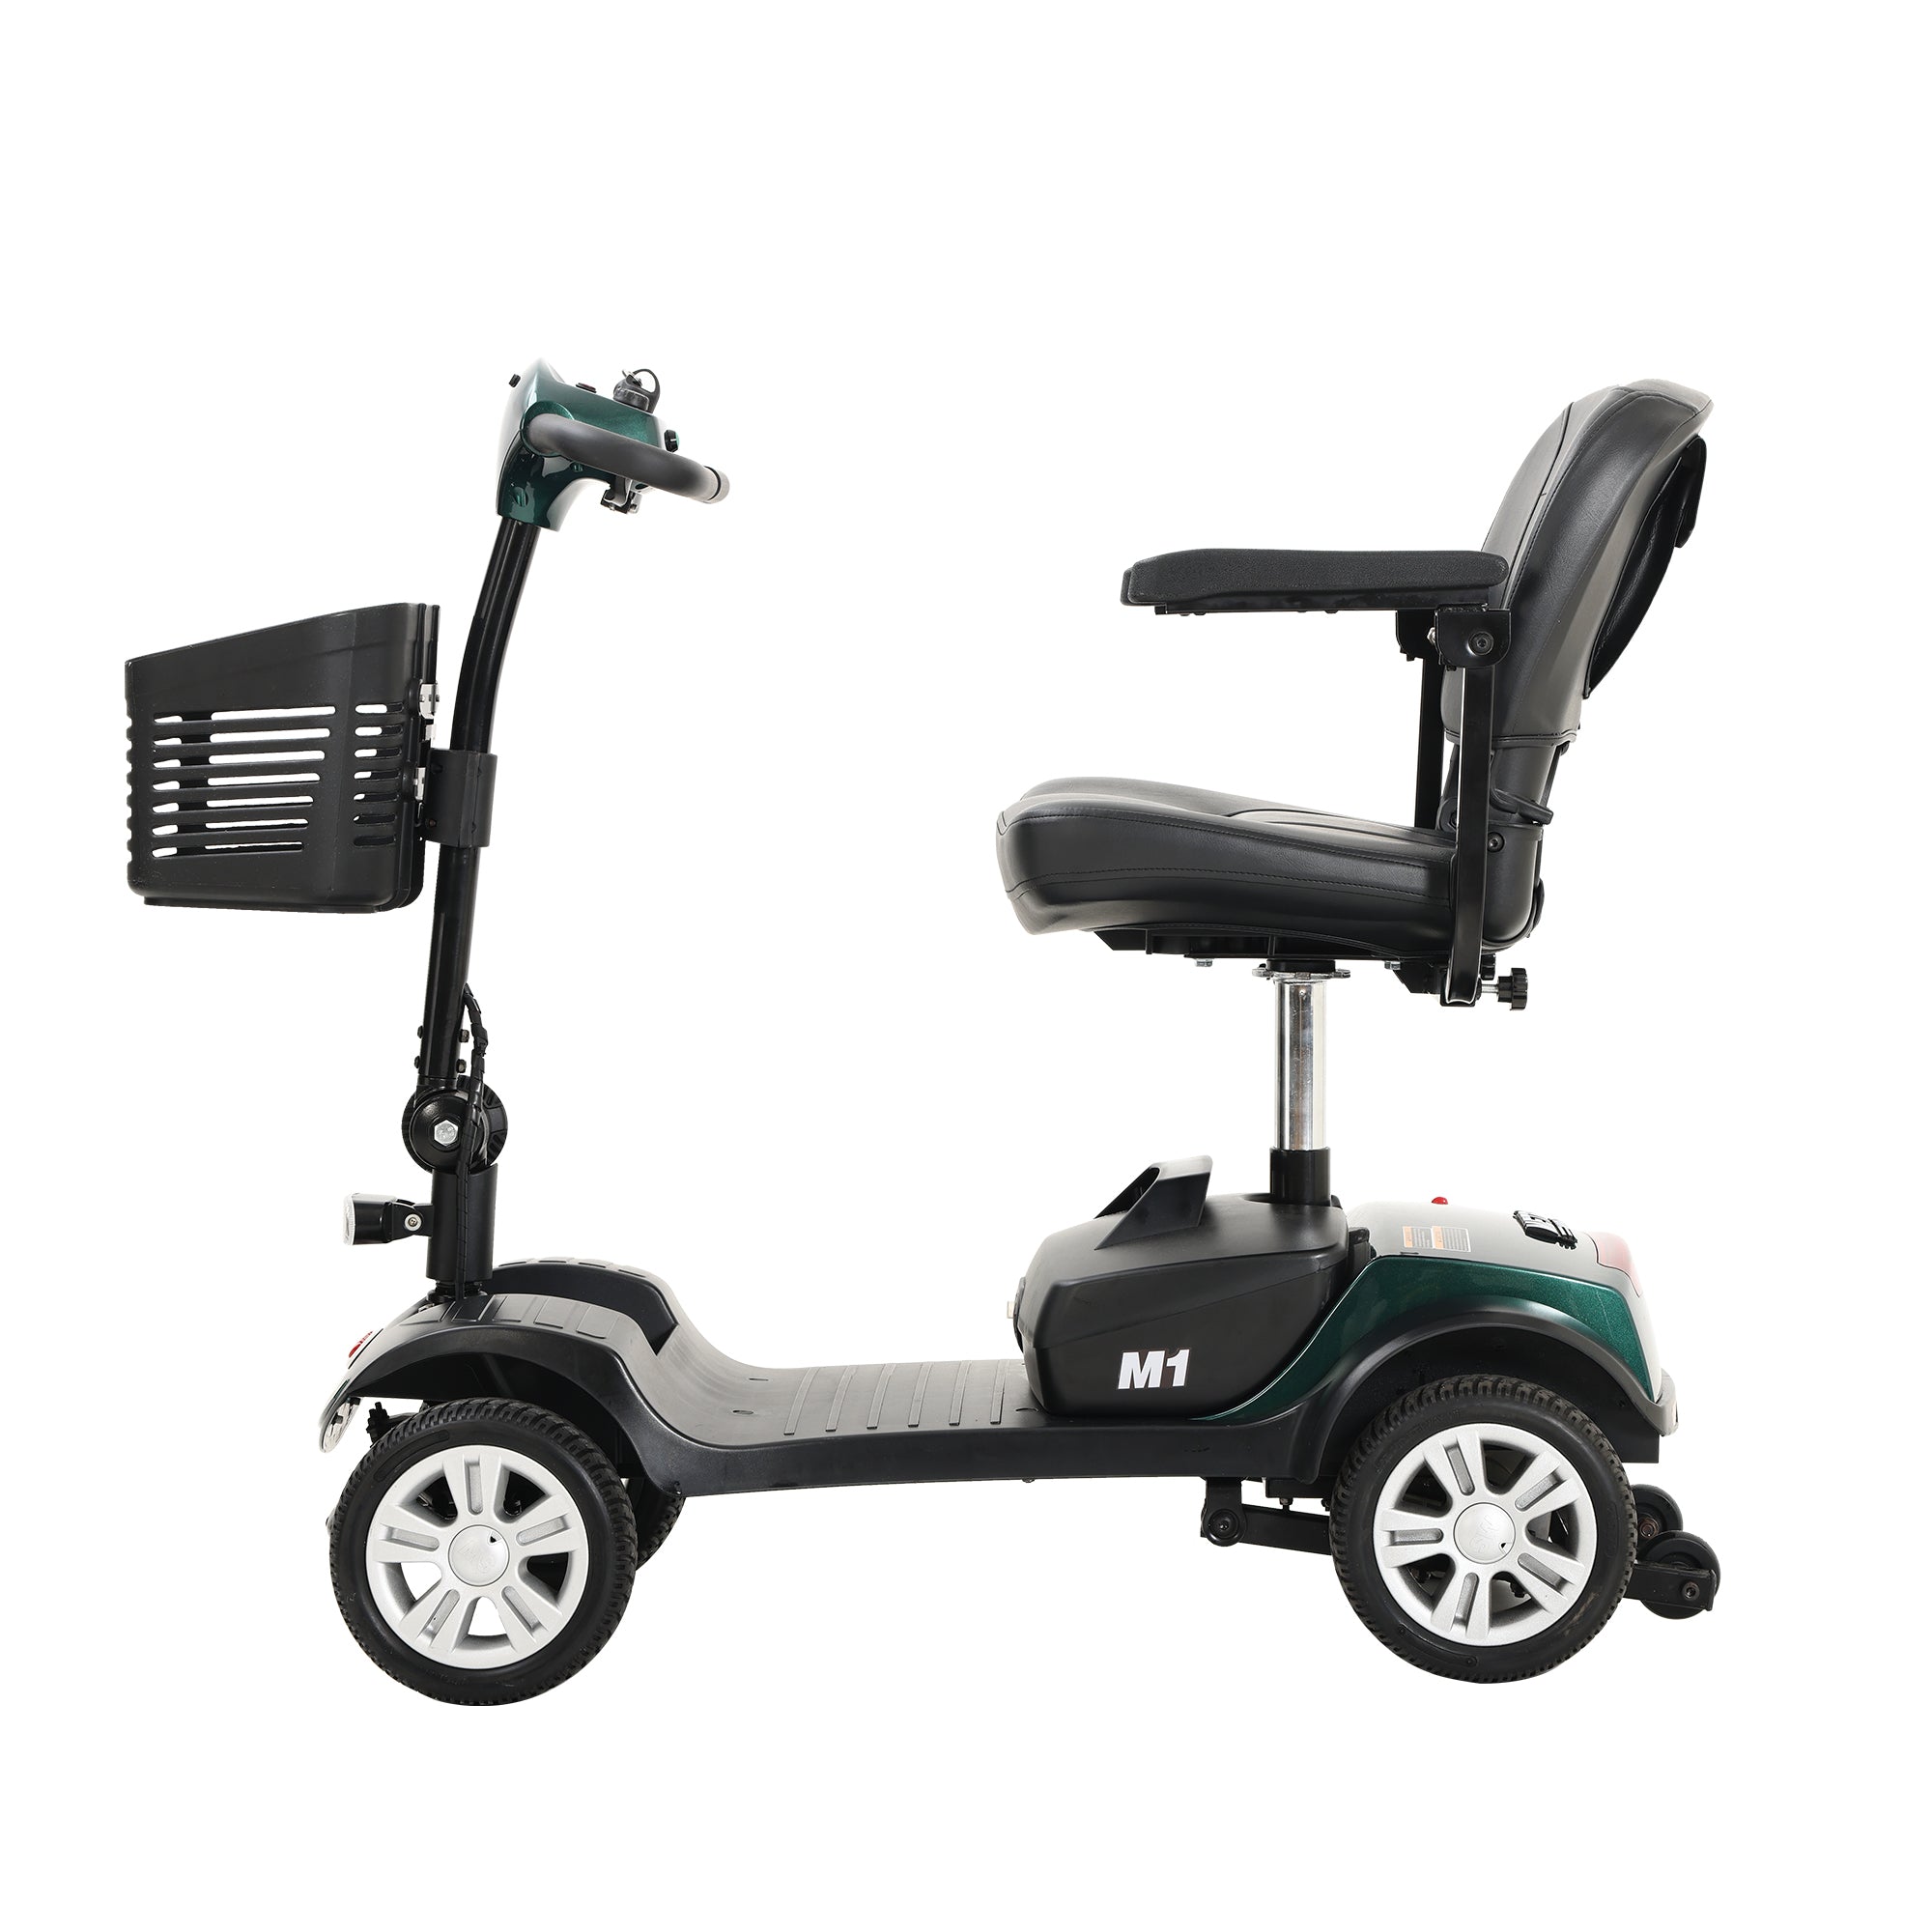 Folding 4 Wheels Compact Travel Mobility Scooter with Led Light 300W, Electric Powered Wheelchair Device Motor for Adult Elderly -300lbs, Power Extended Battery with Charger and Basket, Emerald